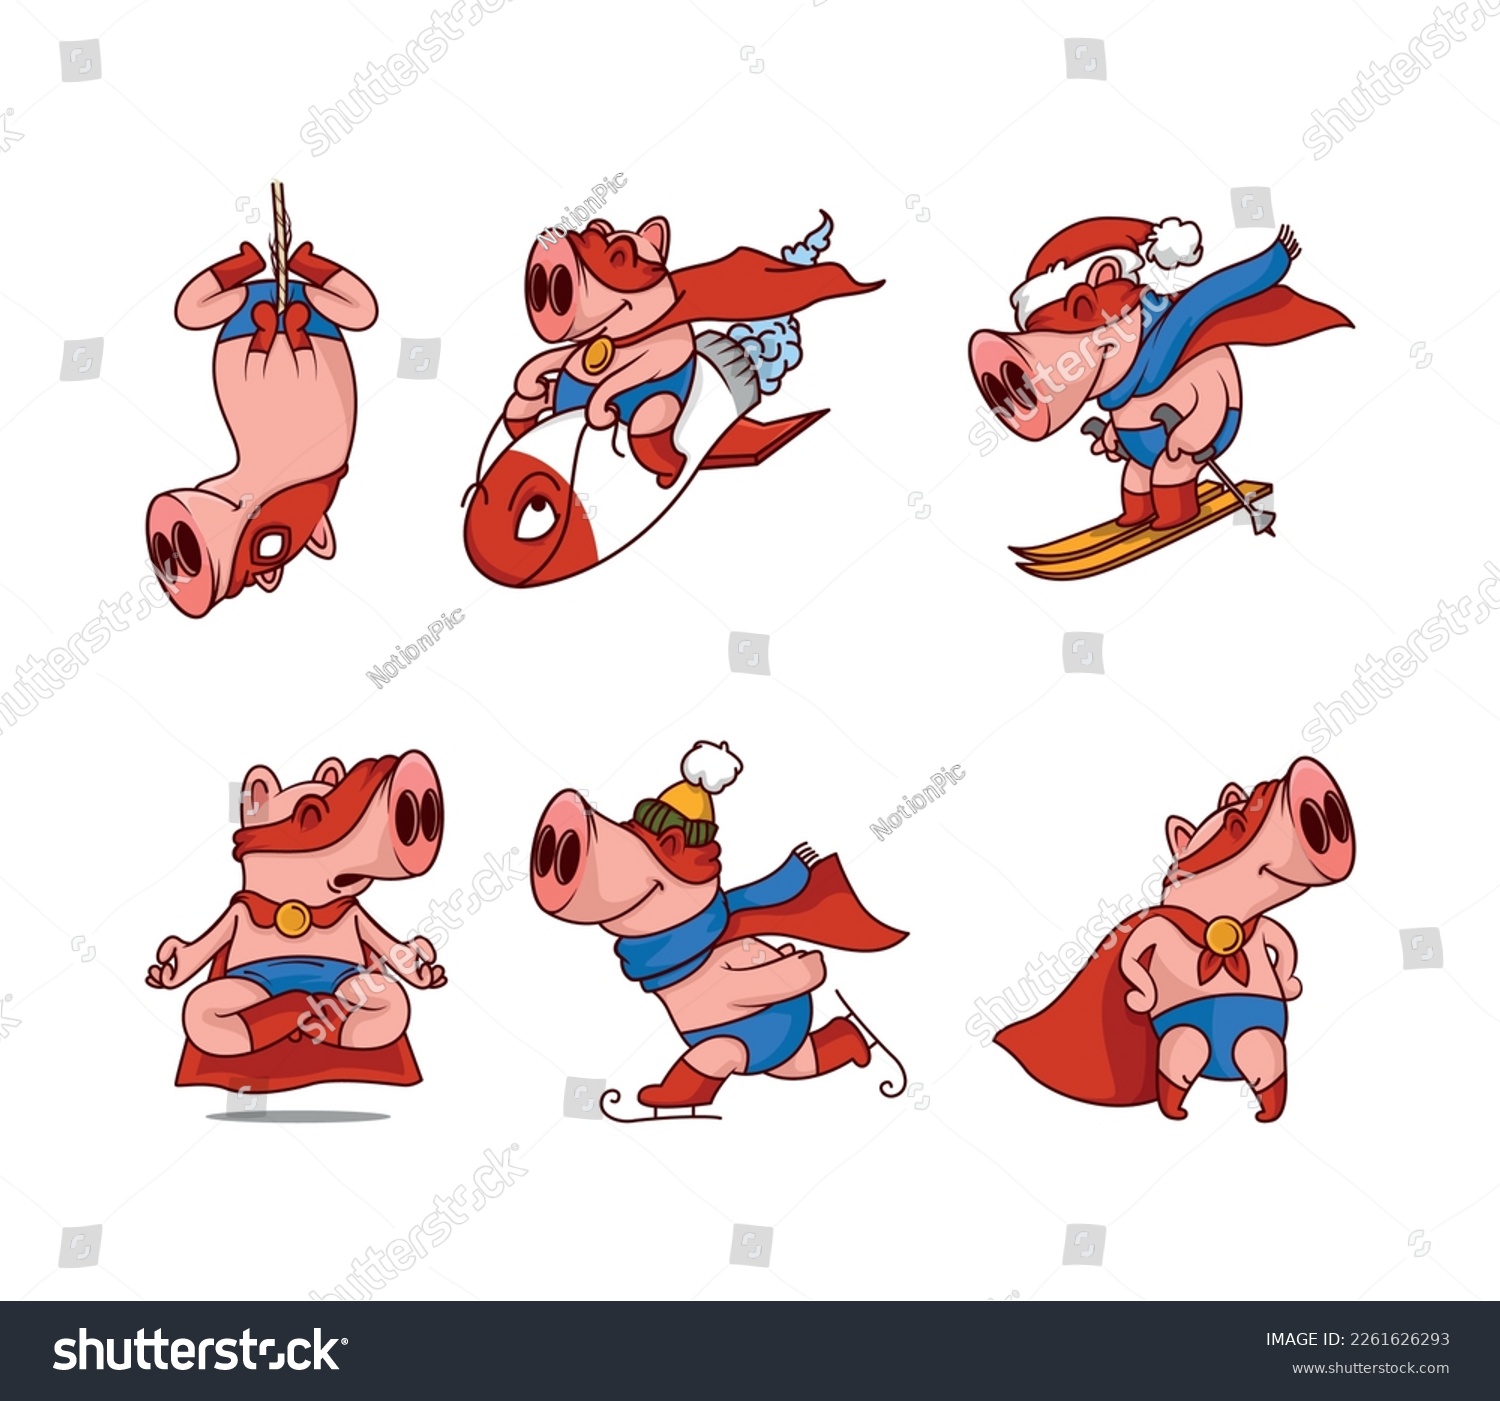 Skiing pig images stock photos d objects vectors